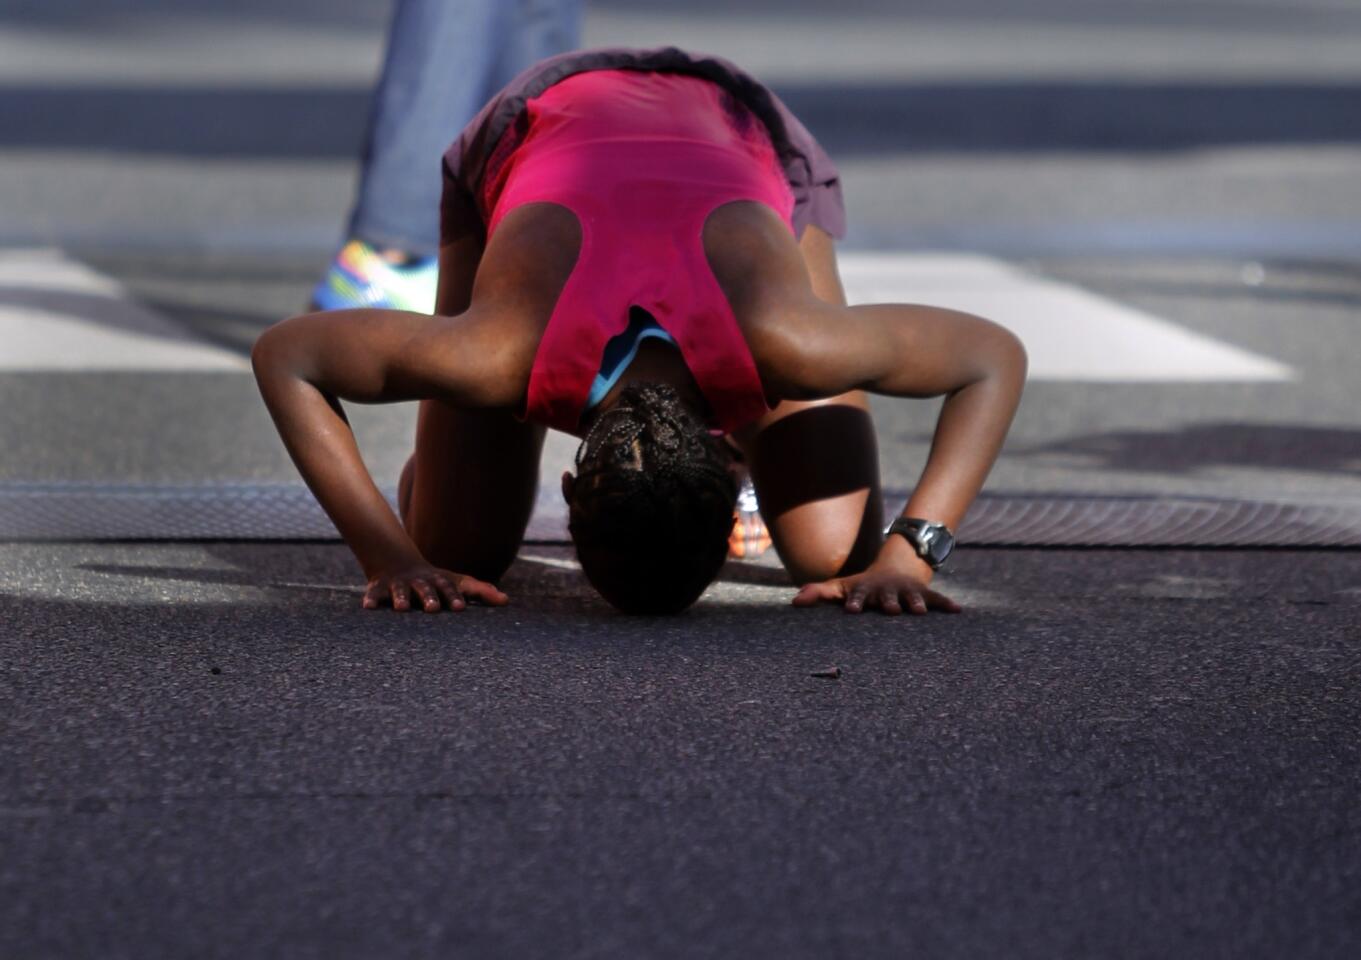 Amane Gobena of Addis Ababa, Ethiopia, puts her head on the ground after winning the women's division of the 29th annual L.A. Marathon.